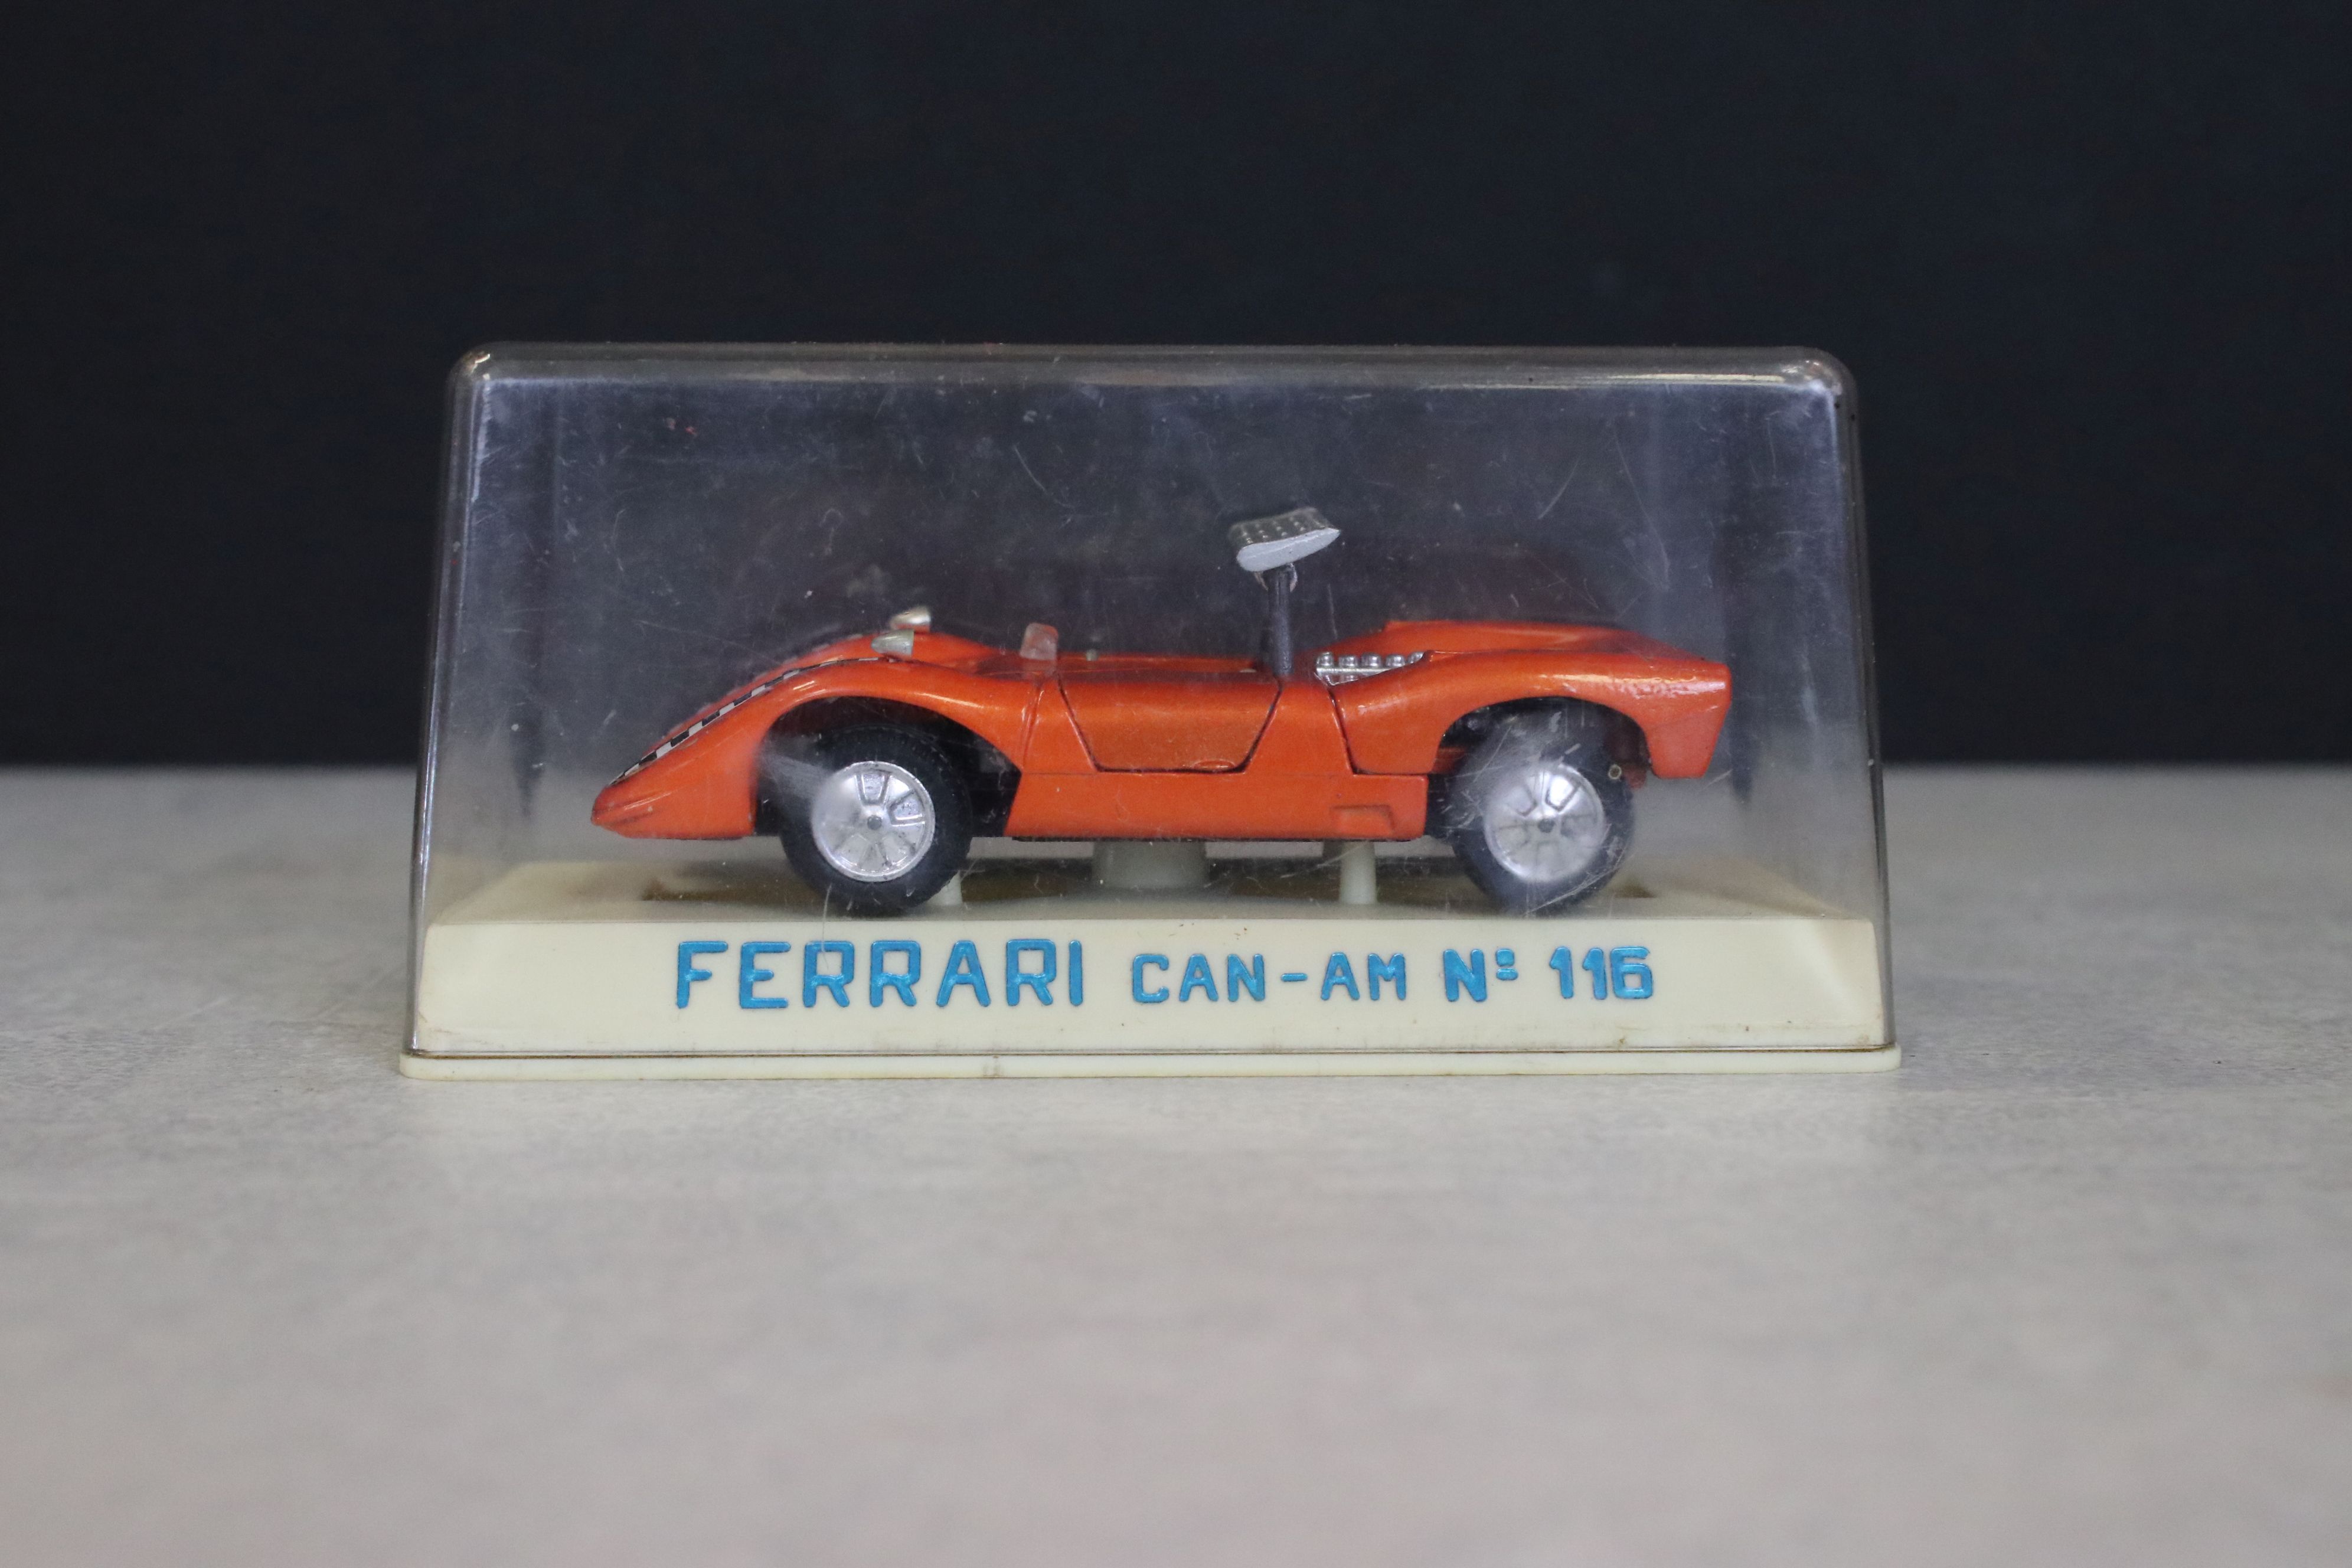 Over 40 boxed / cased diecast models, mainly Ferrari related, to include Minichamps, Burago, - Image 6 of 9